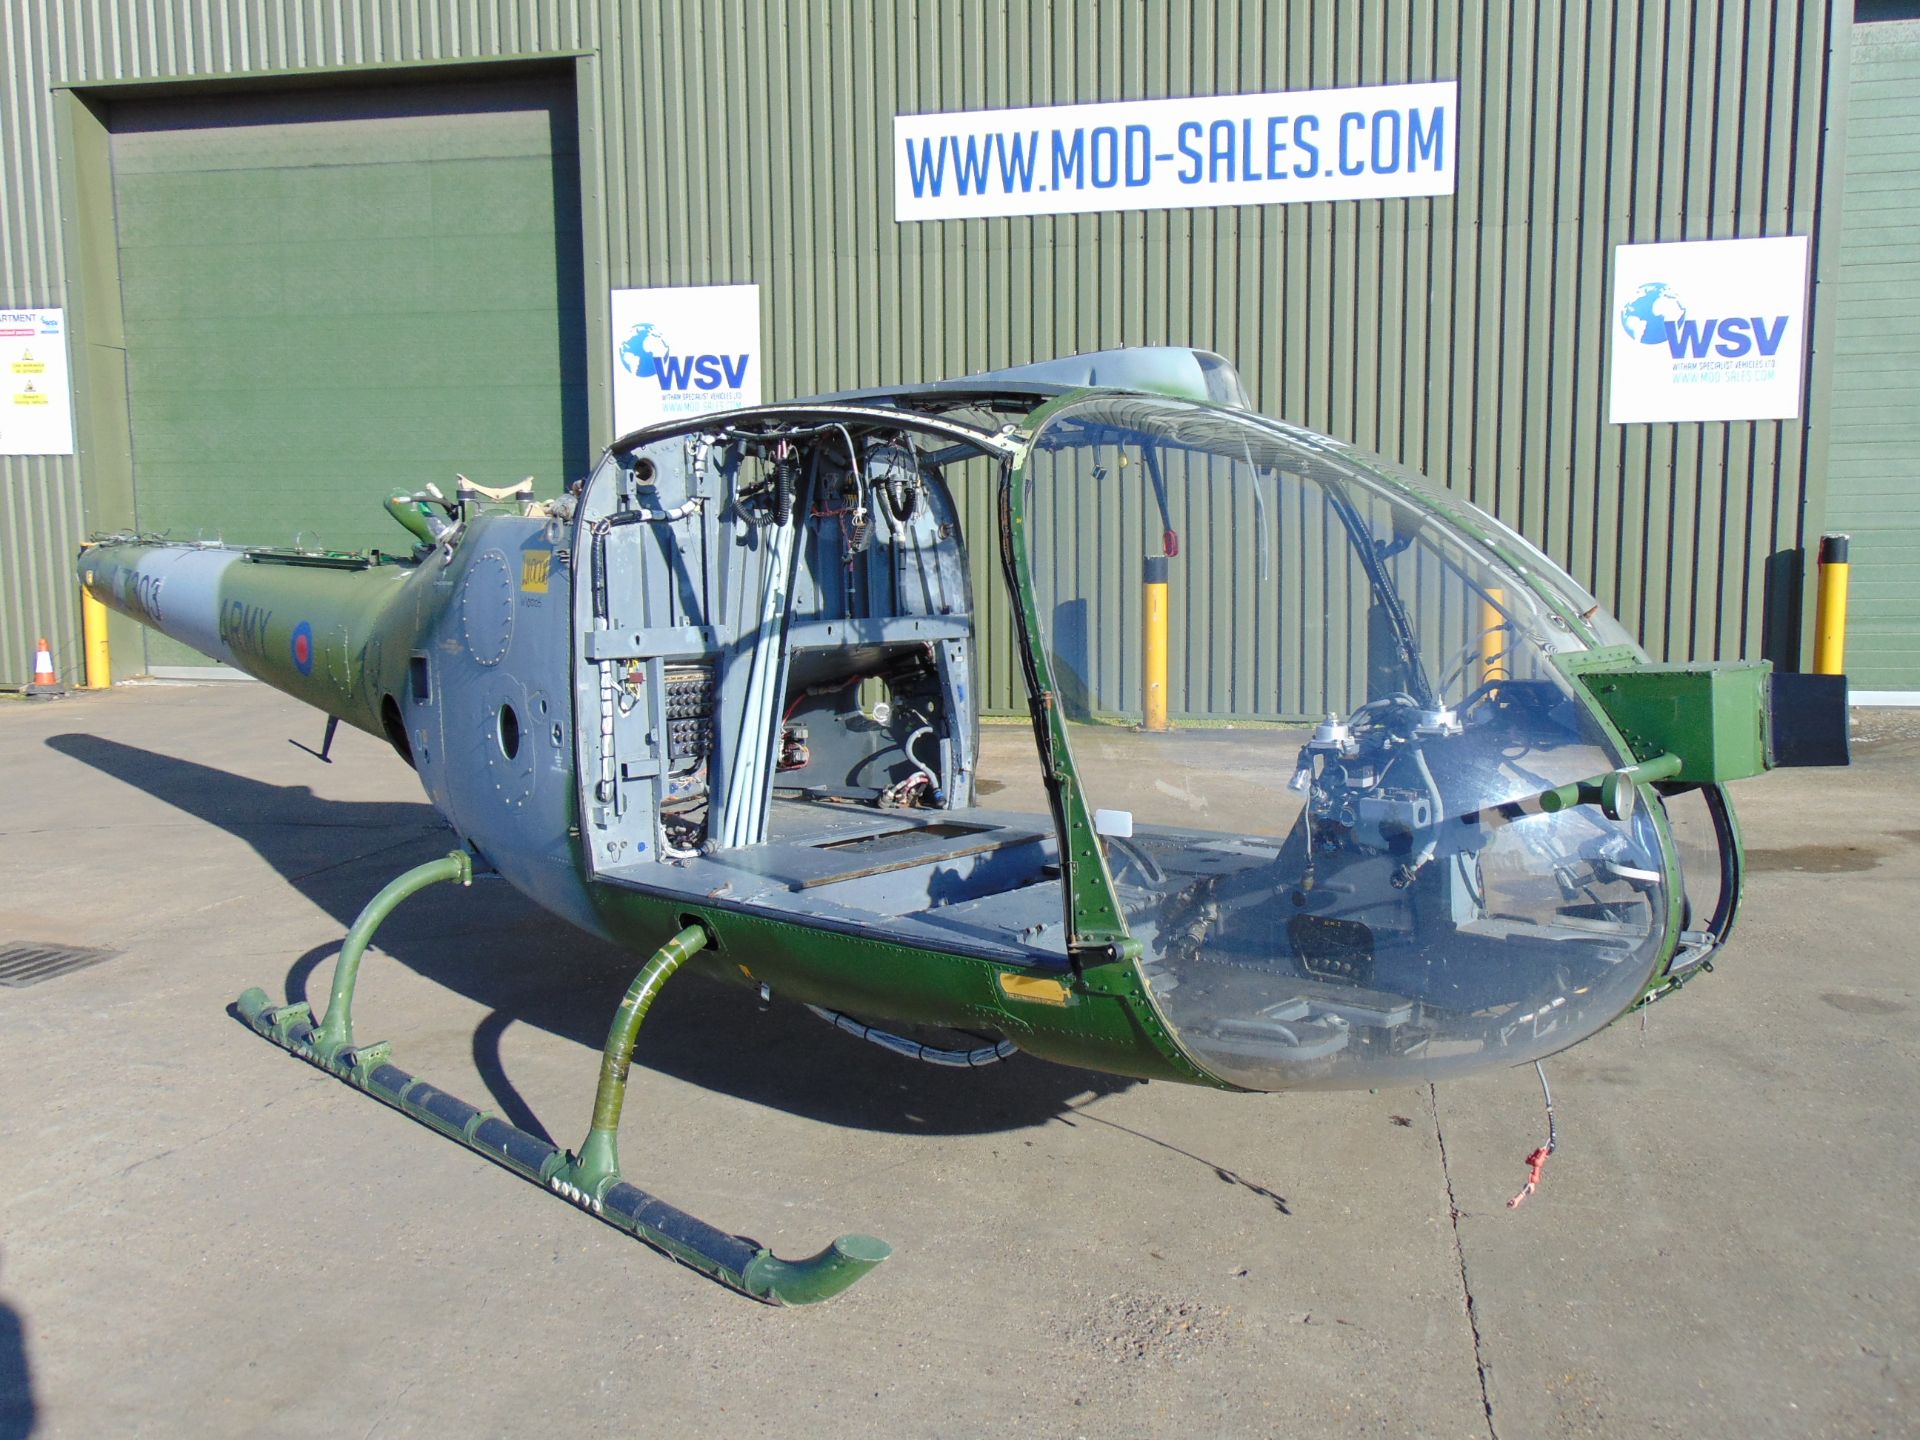 Gazelle AH 1 Turbine Helicopter Airframe (TAIL NUMBER XZ303) - Image 25 of 25